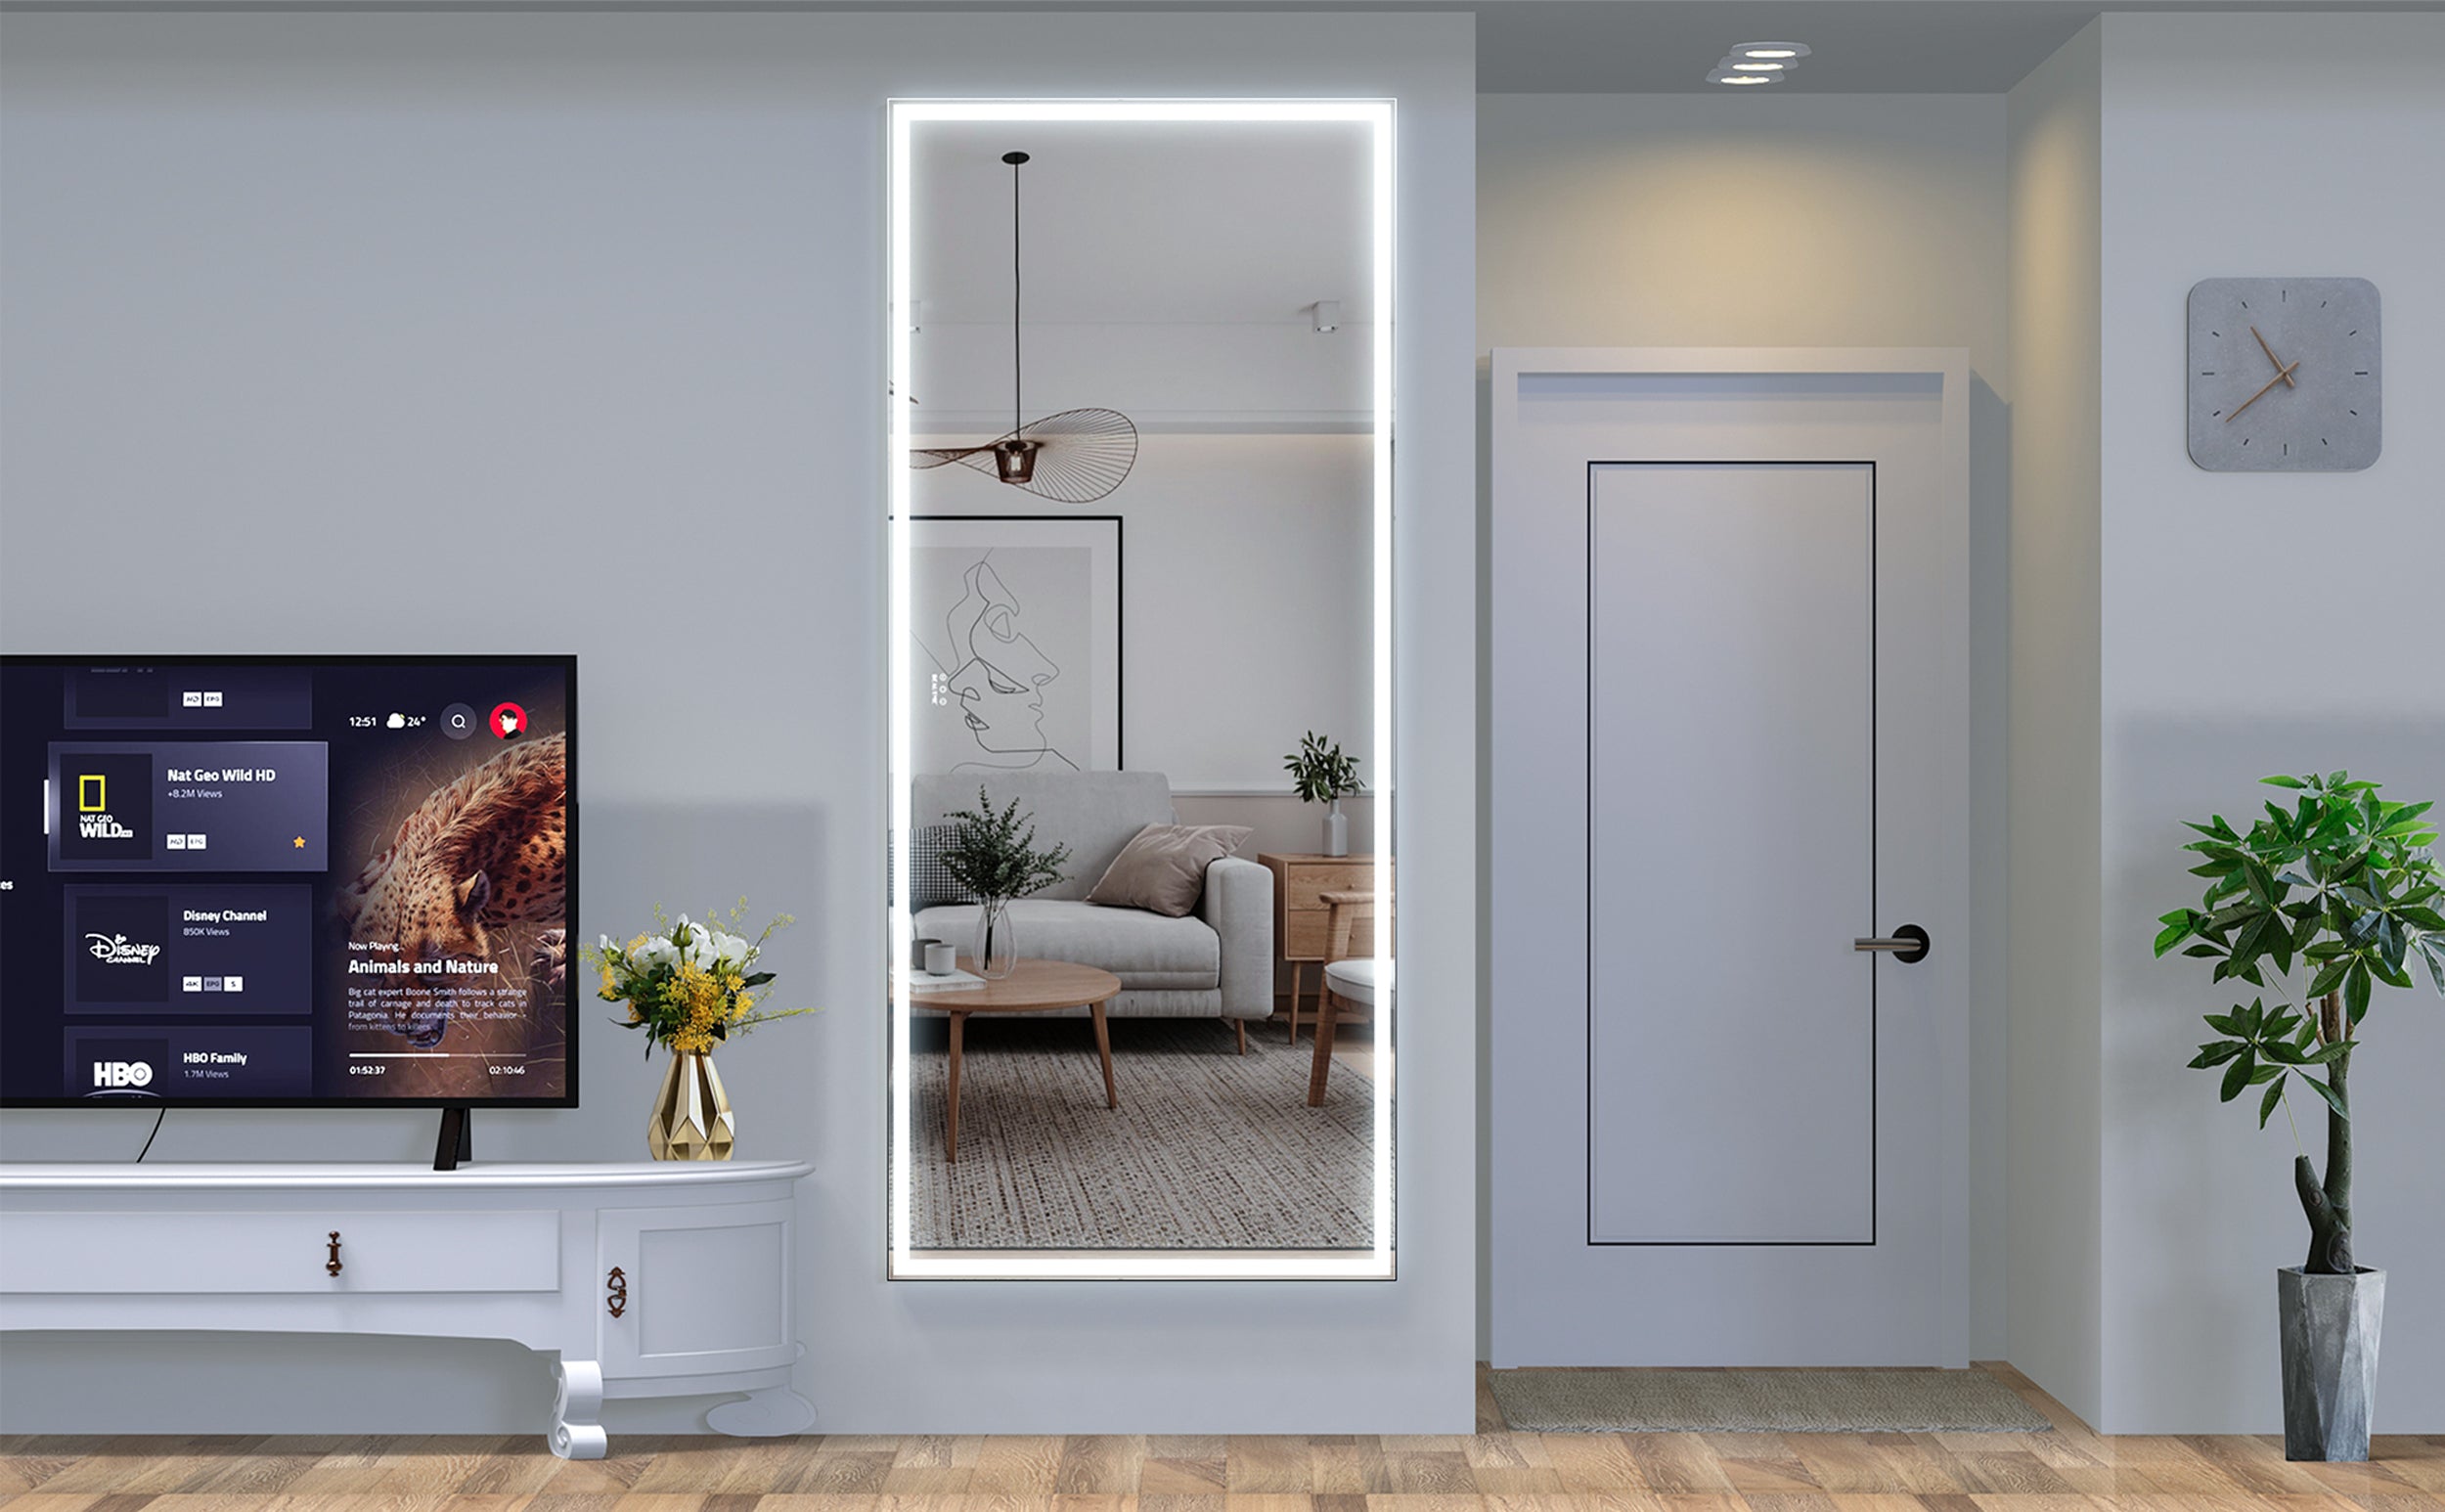 Extra Large LED Bathroom Mirror with 3 Color Aluminum Framed Wall Mirror Full Body Mirror with Lights, Vertical Horizontal Hanging Aluminum Framed Mirror for Bedroom Living Room, Silver, 84X36 inches